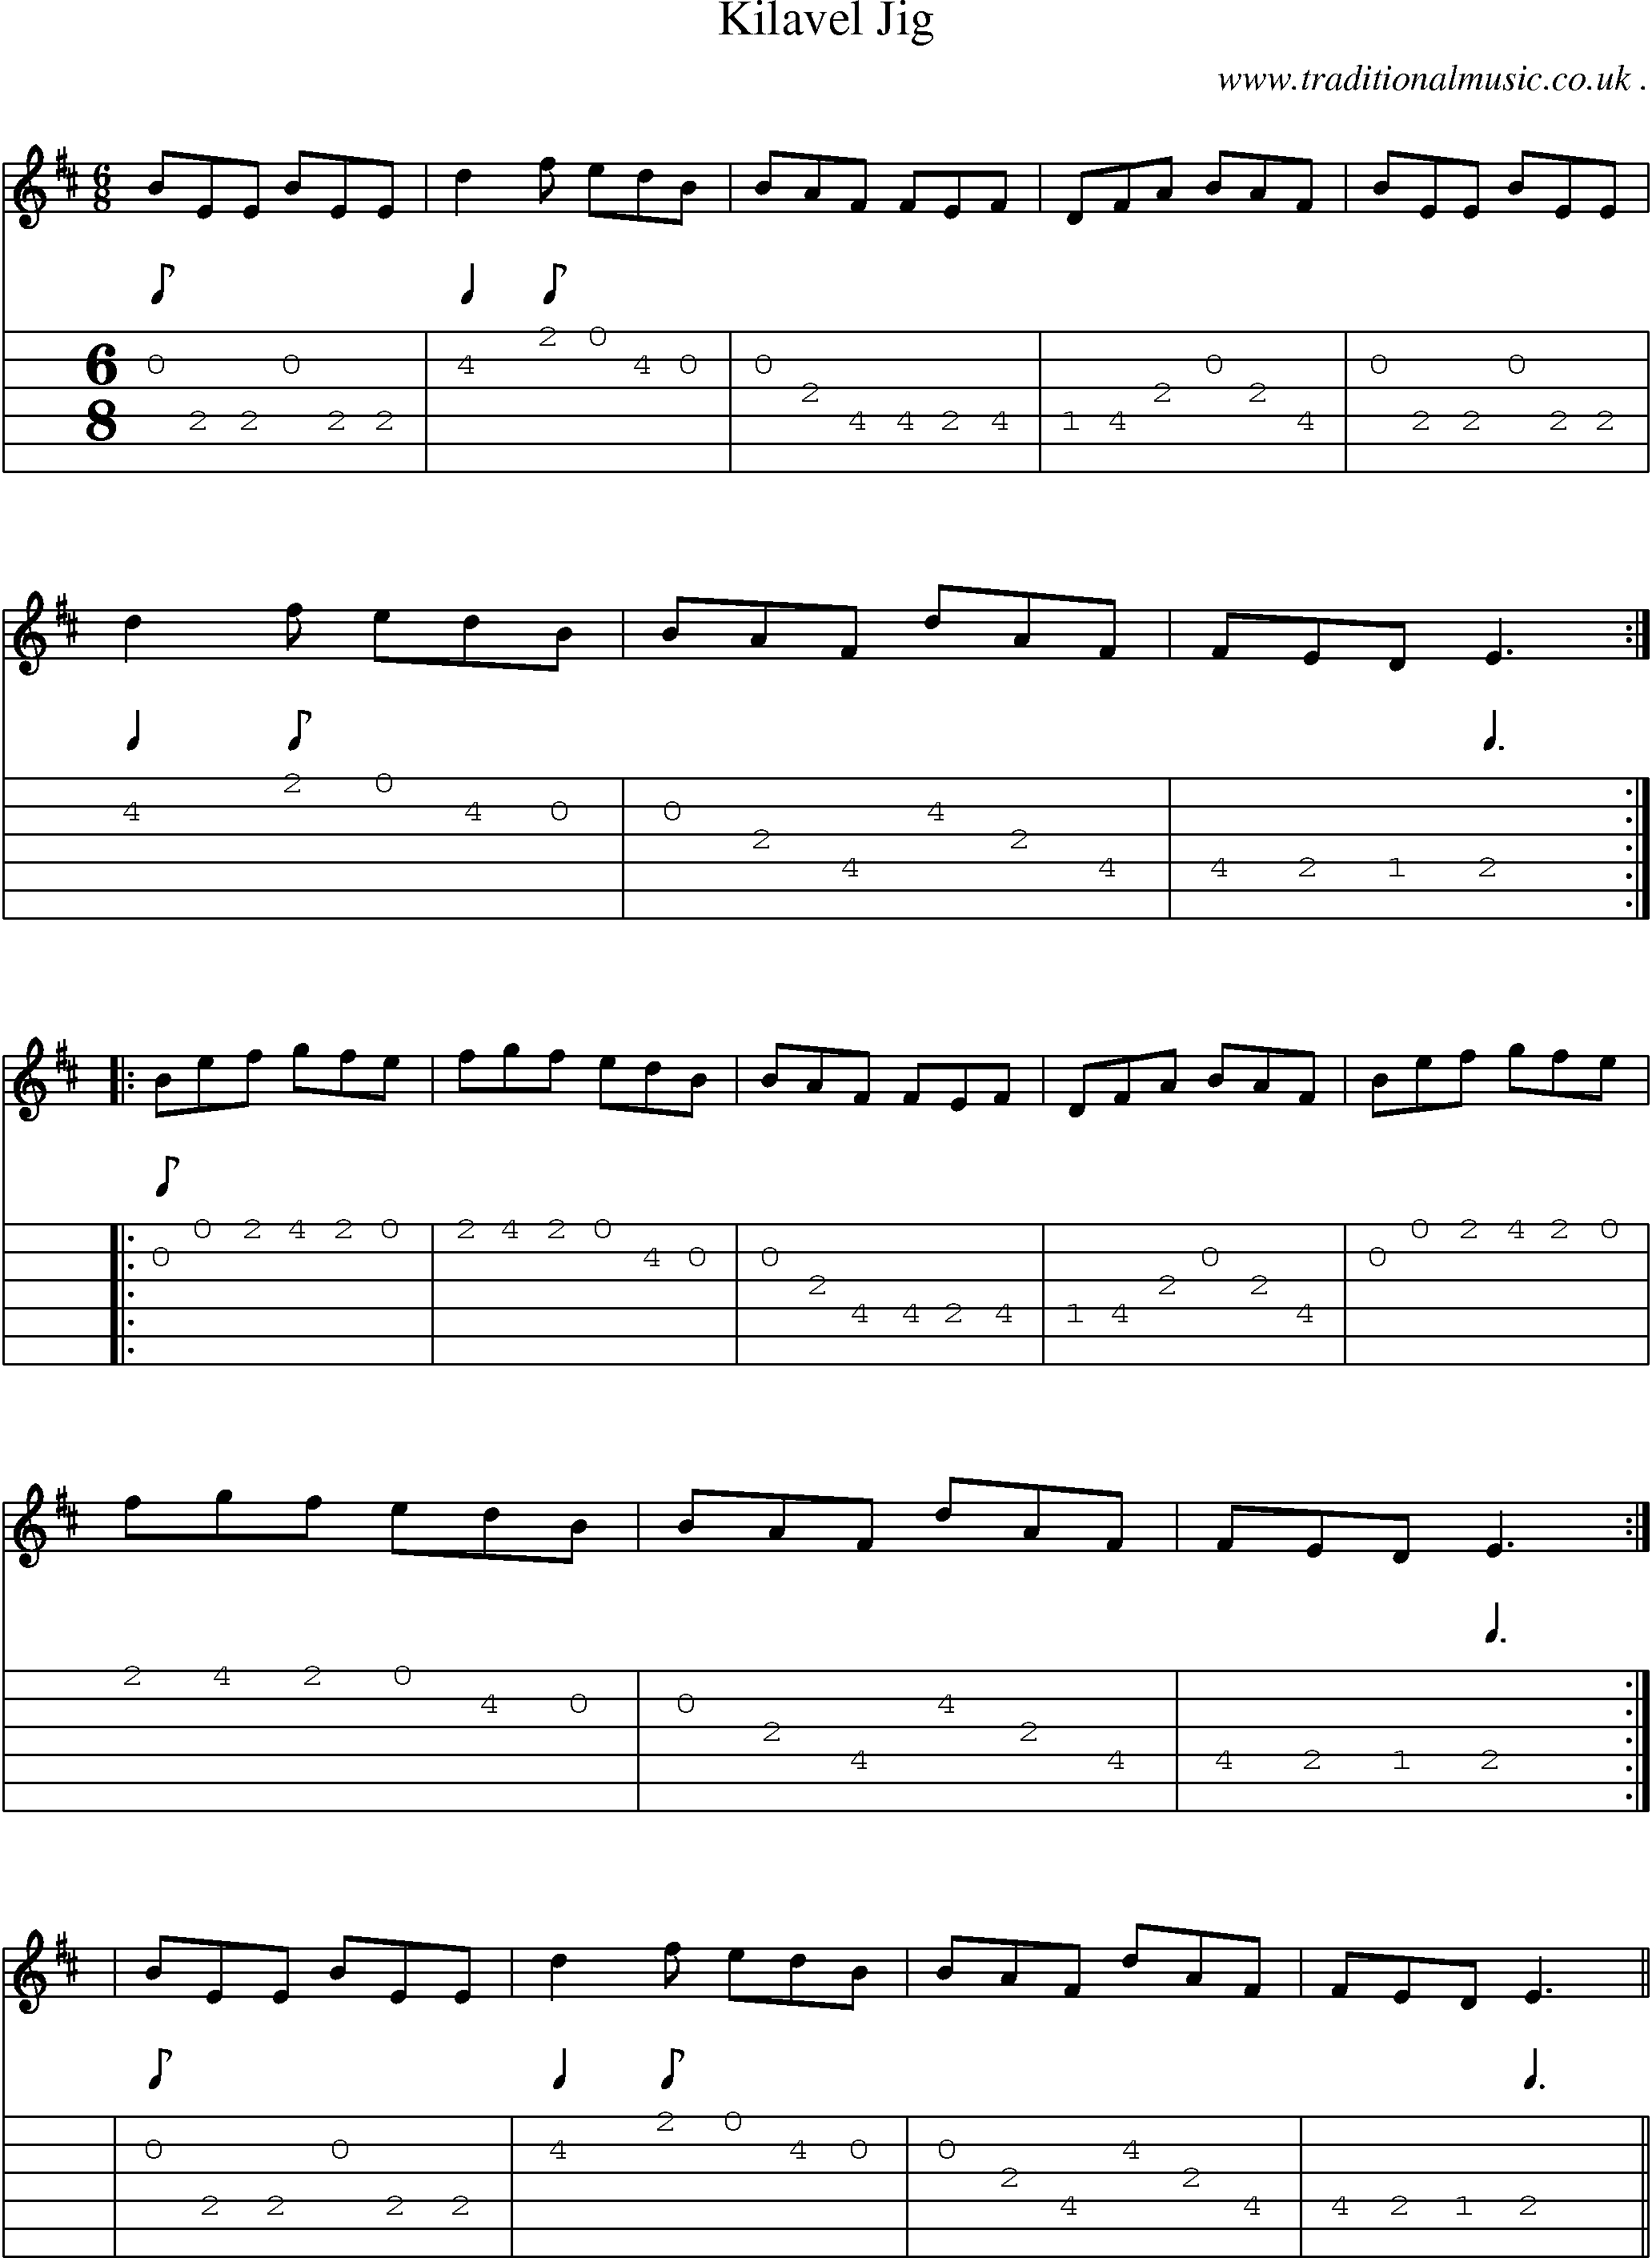 Sheet-Music and Guitar Tabs for Kilavel Jig